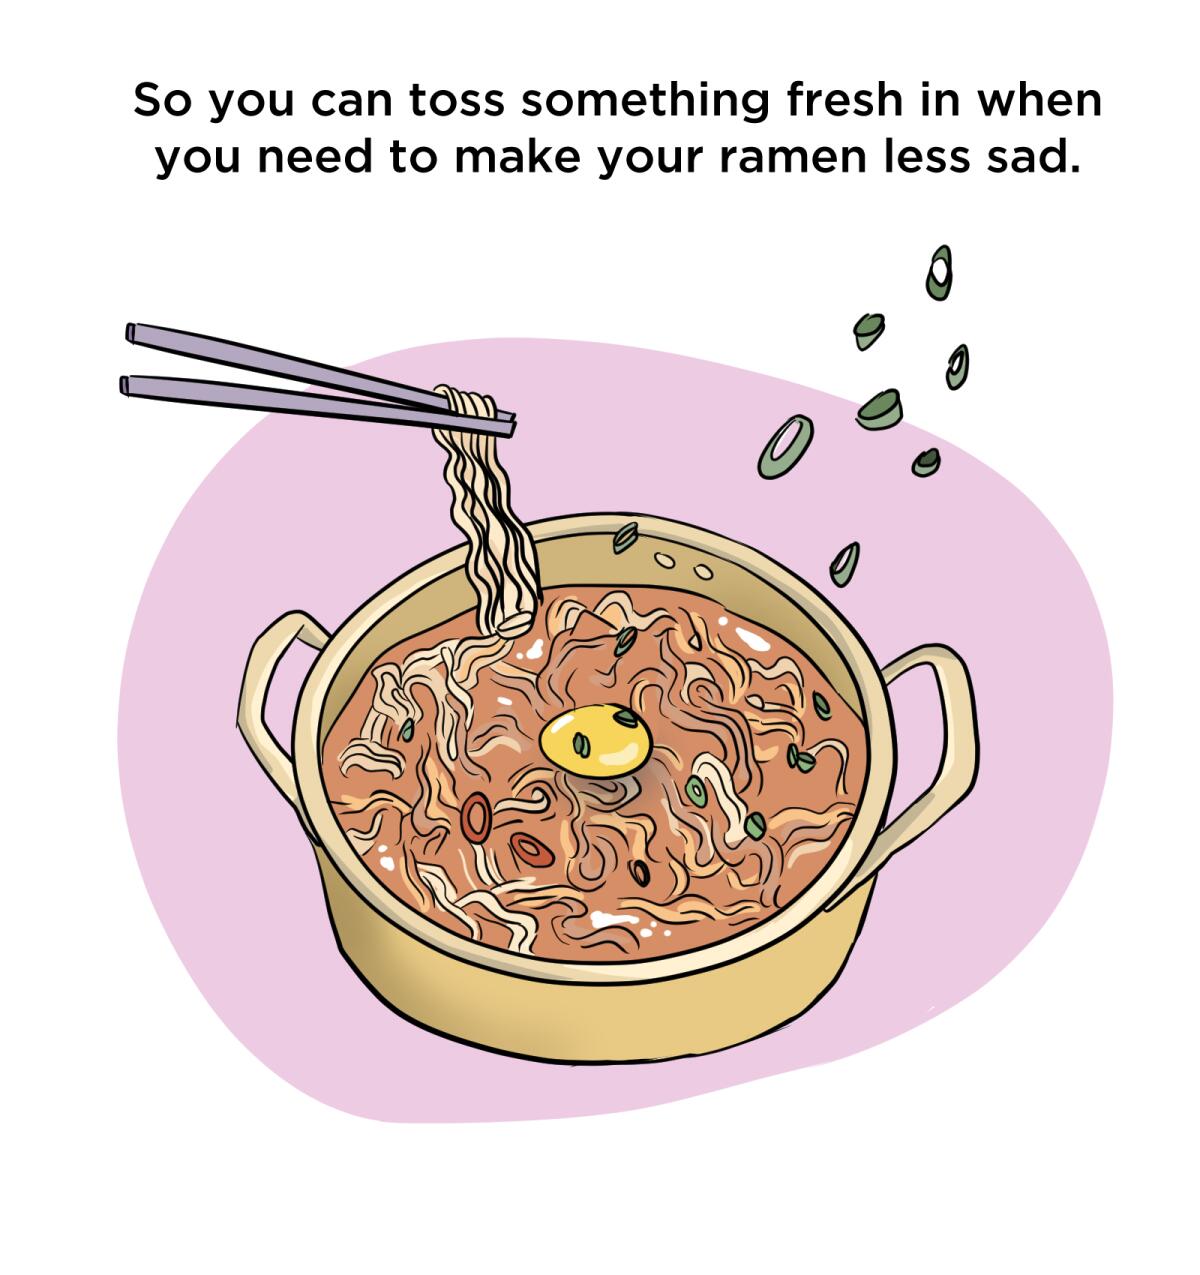 So you can toss something fresh in when you need to make your ramen less sad.